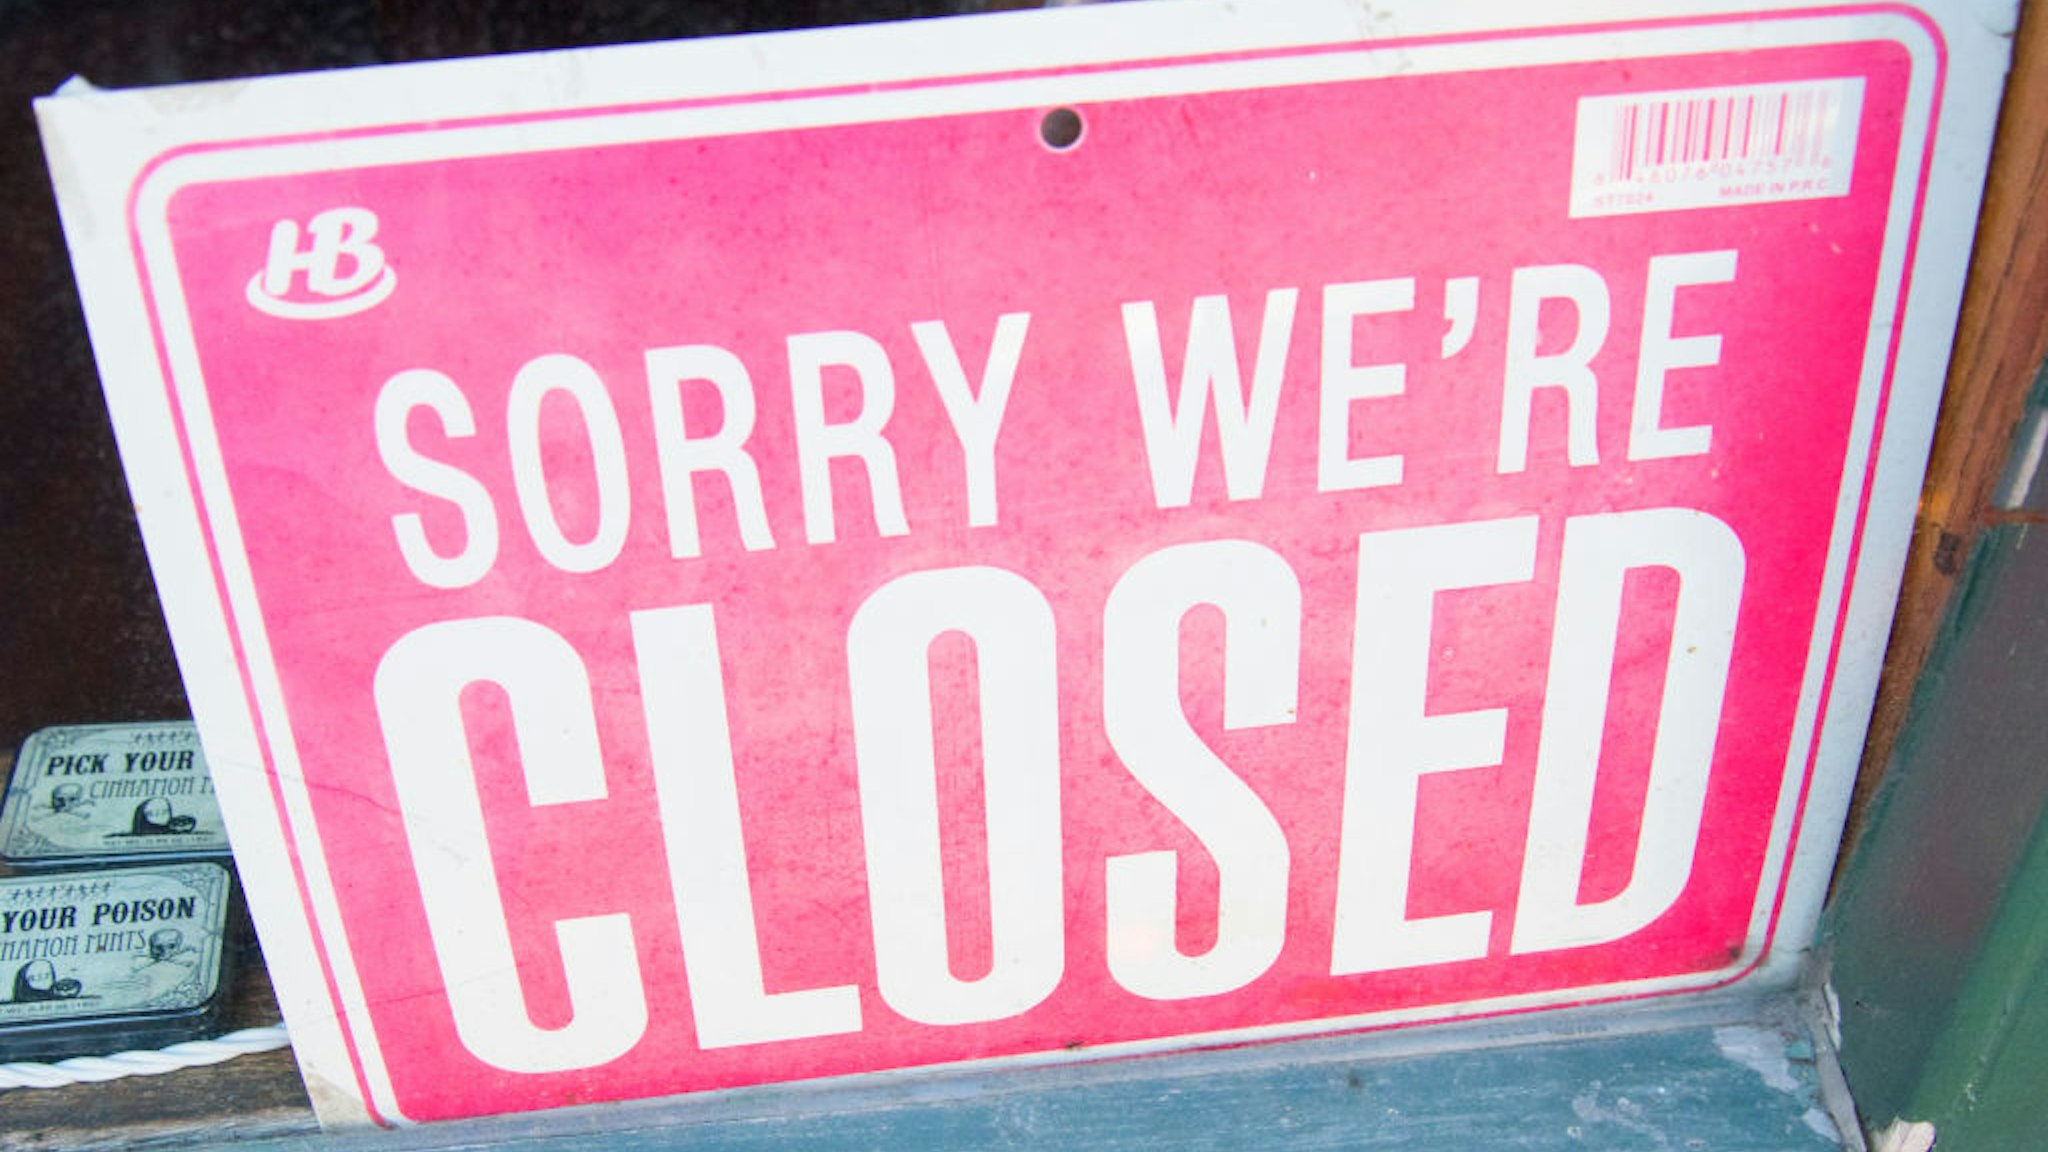 Sign in Store Window, Sorry Were Closed. (Photo by: Education Images/Universal Images Group via Getty Images)